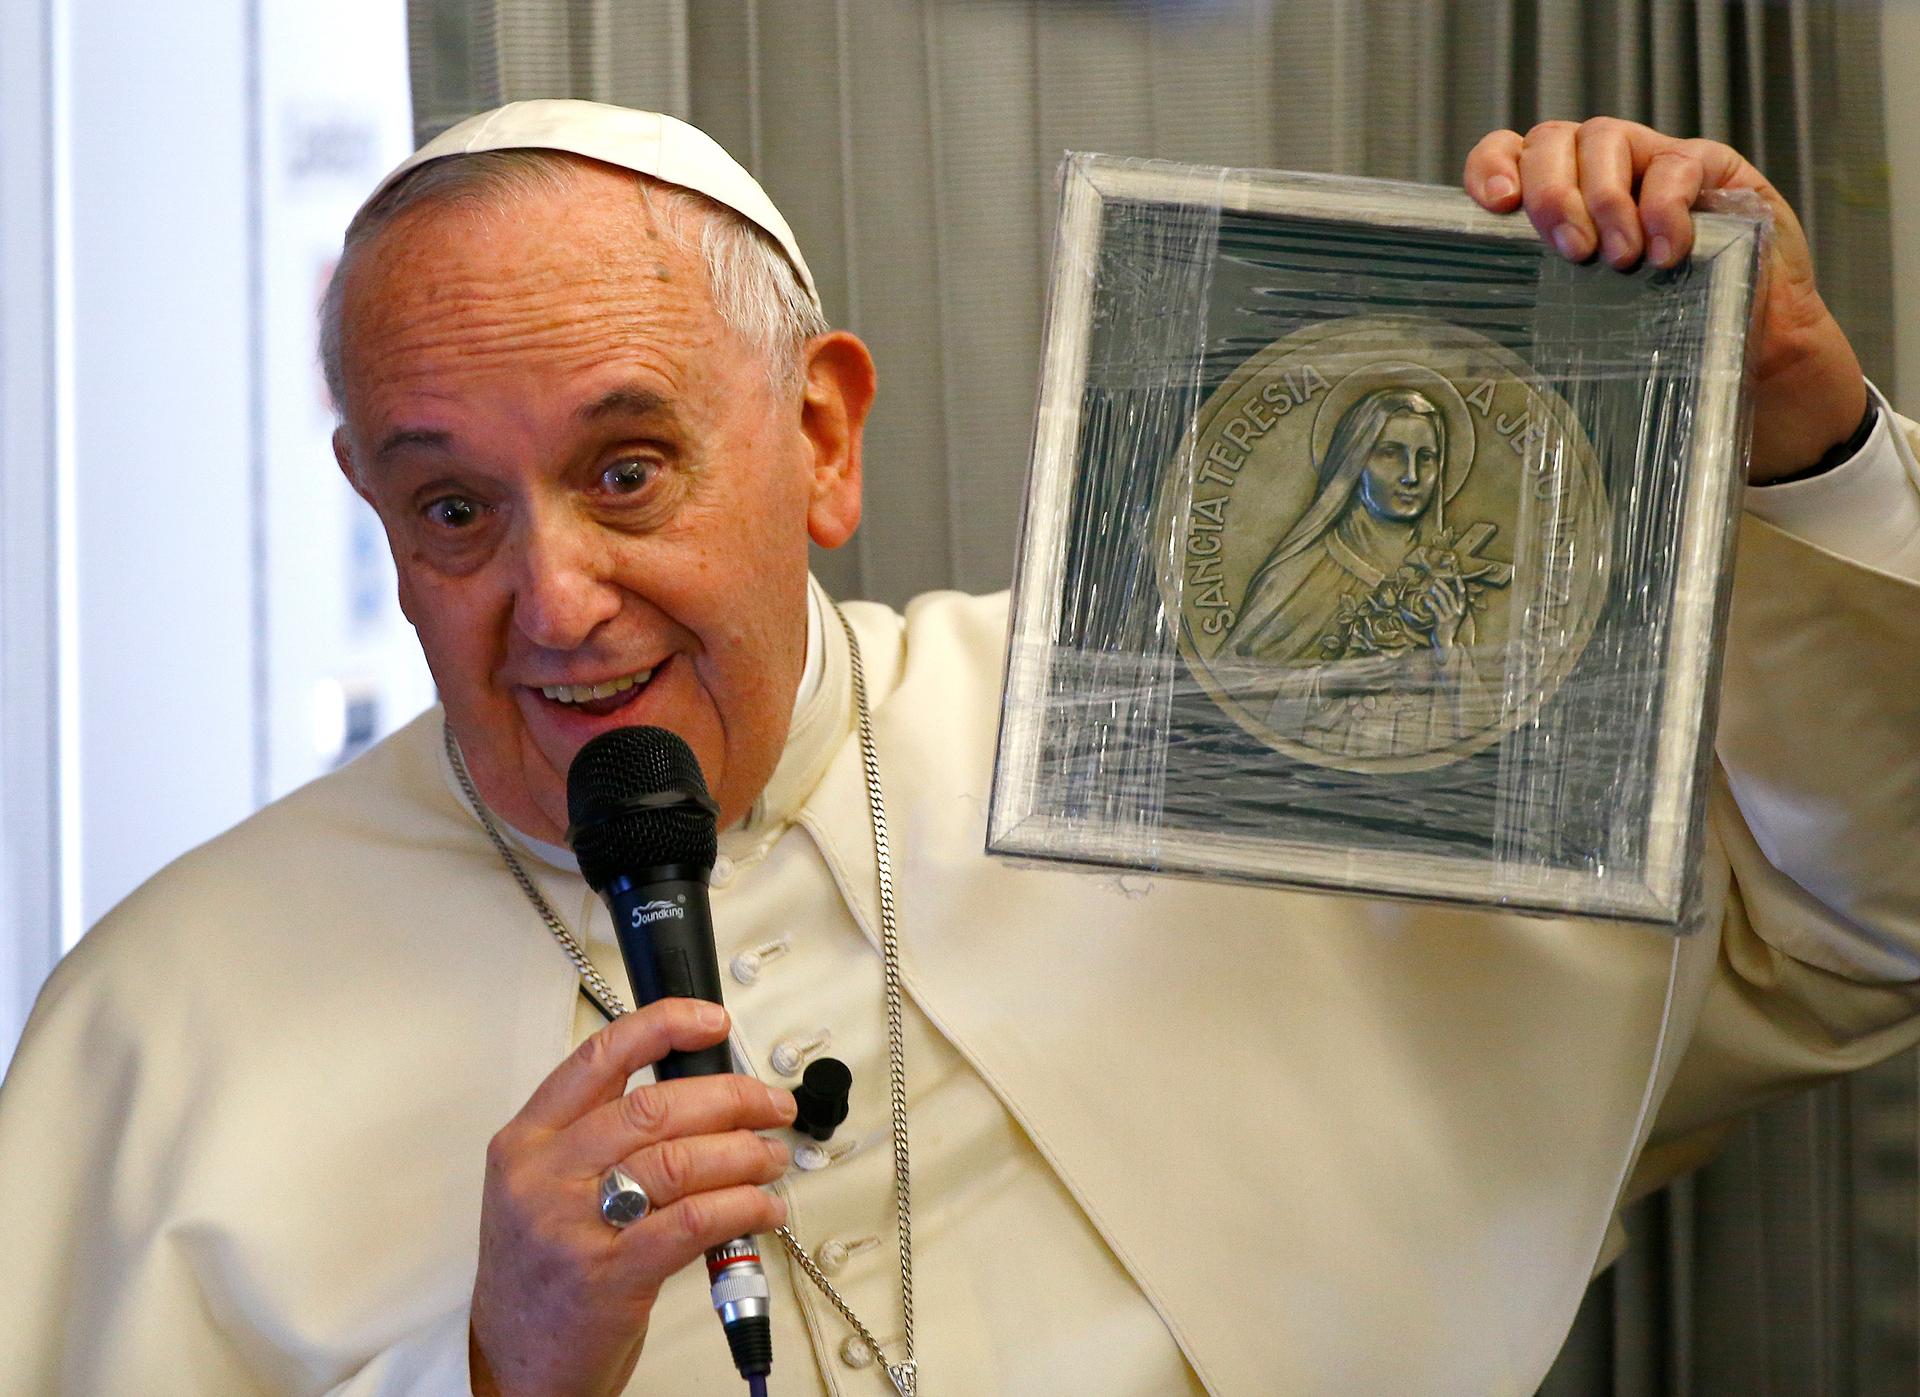 Pope Francis holds up a plaque with an image of Saint Theresa during a meeting with journalists on his flight from Colombo, Sri Lanka, to Manila in the Philippines on January 15, 2014.